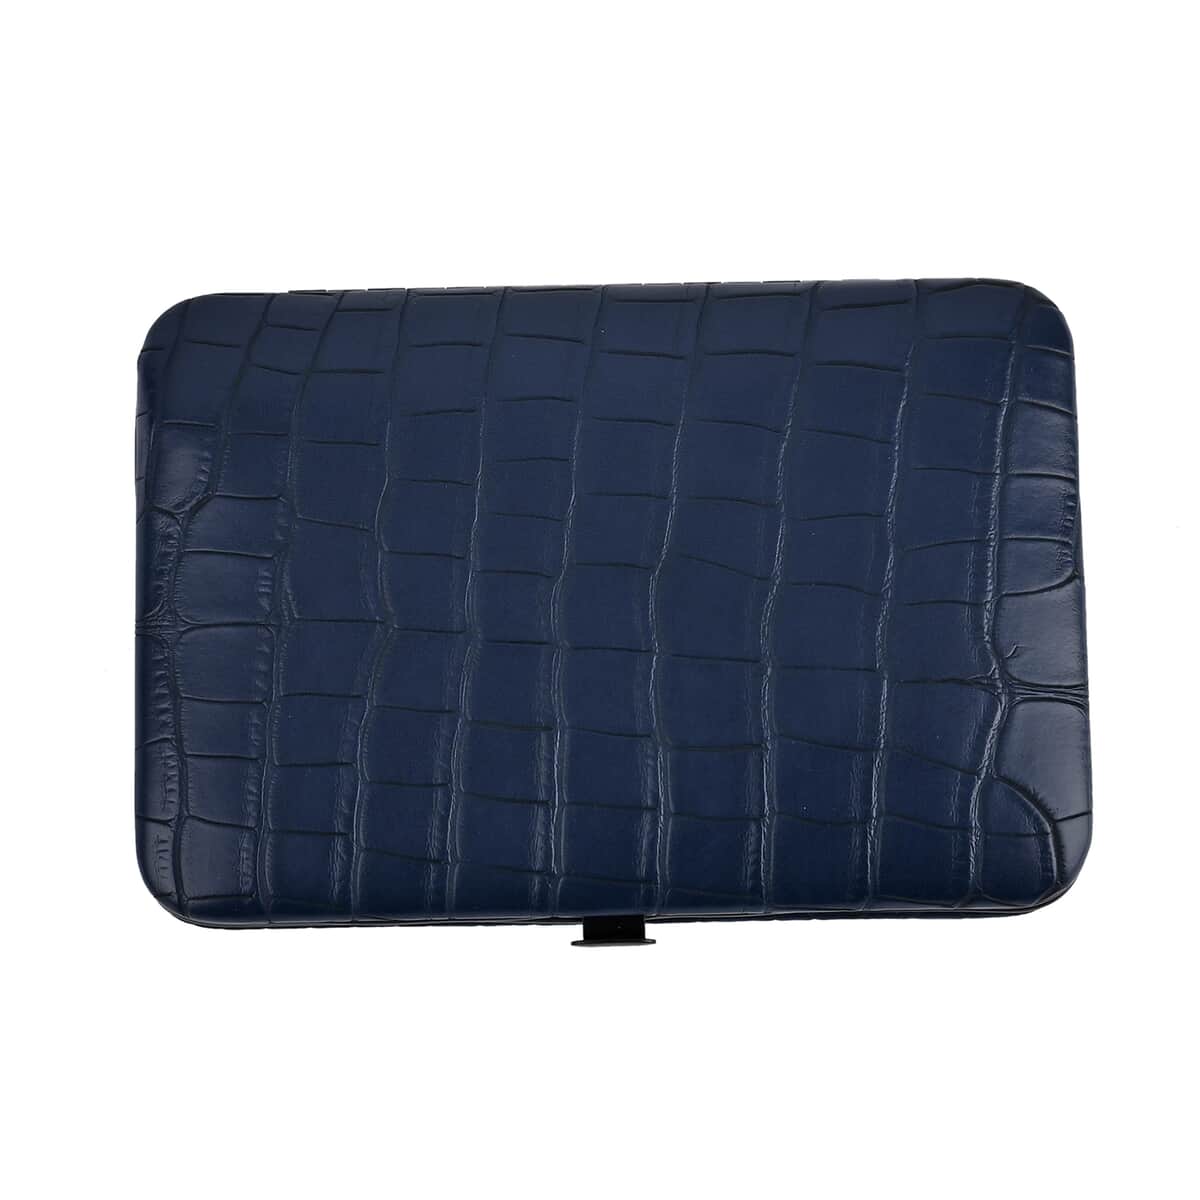 20 in 1 Stainless Steel Manicure Grooming Kit - Navy Faux Leather Case (6.1x2.8x0.98) image number 2